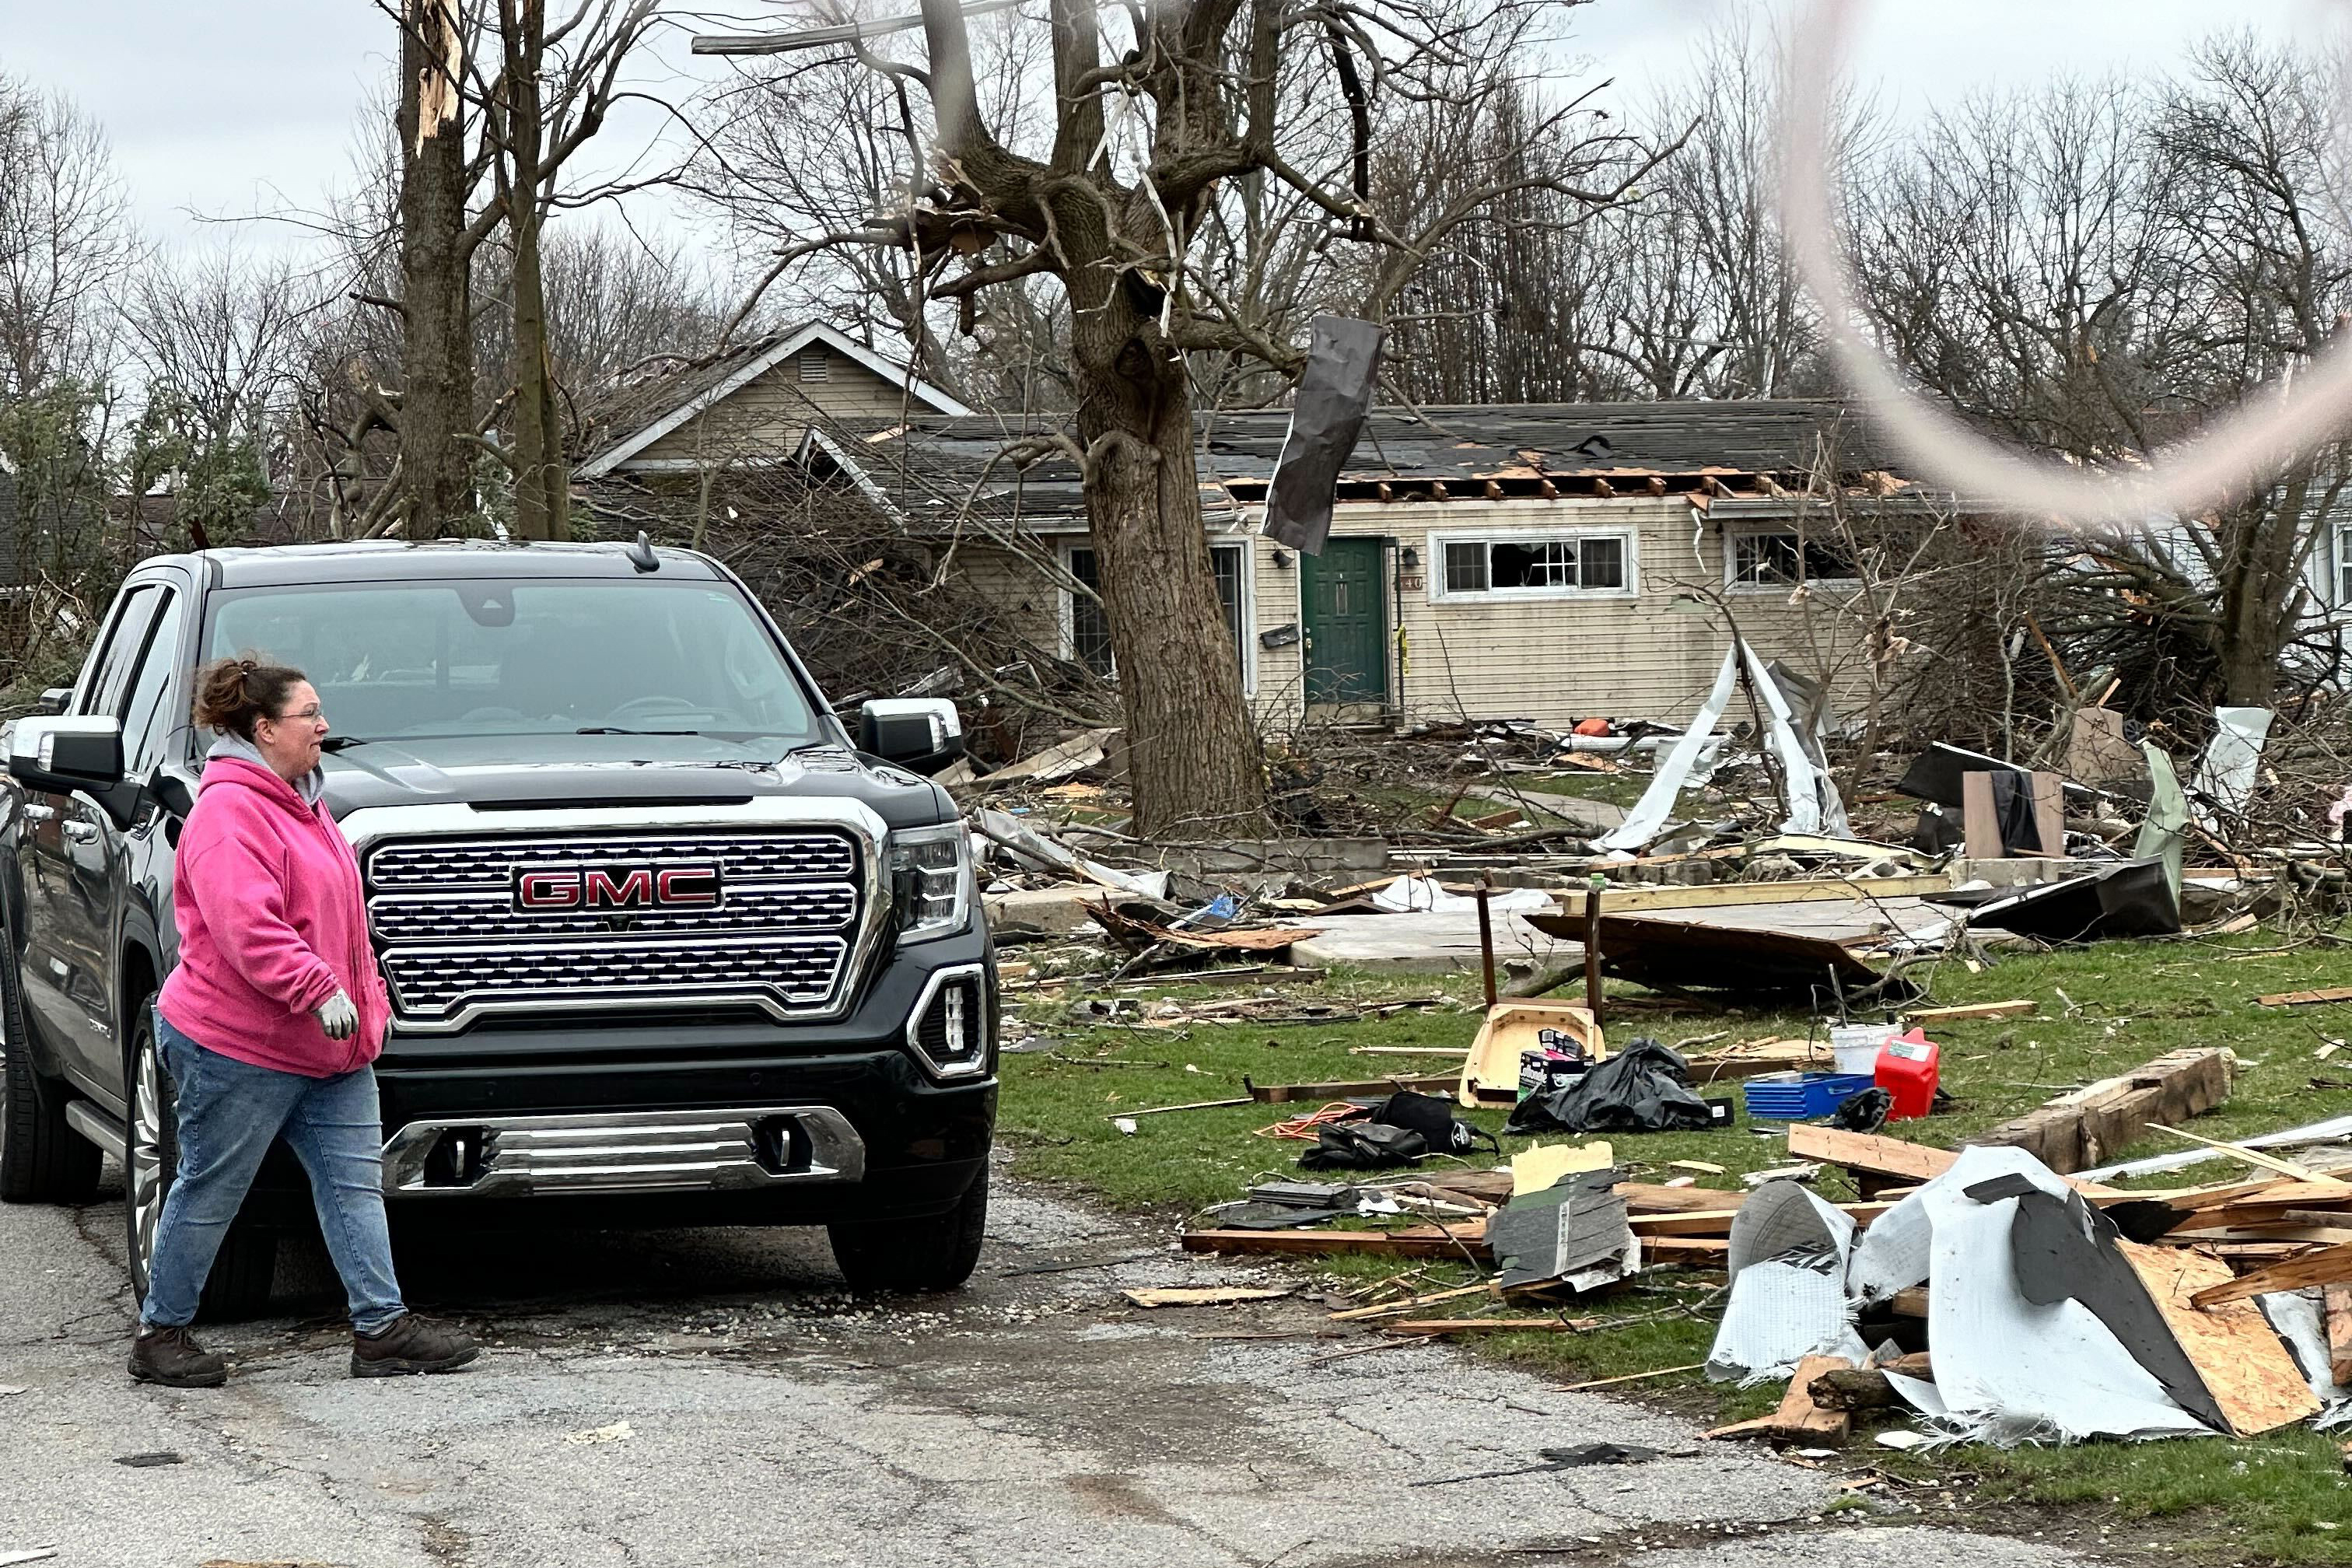 A woman in a pink jacket and gloves walks in front of a pickup truck toward a yard scattered with debris and branches. The home in the background is missing chunks of its roof.